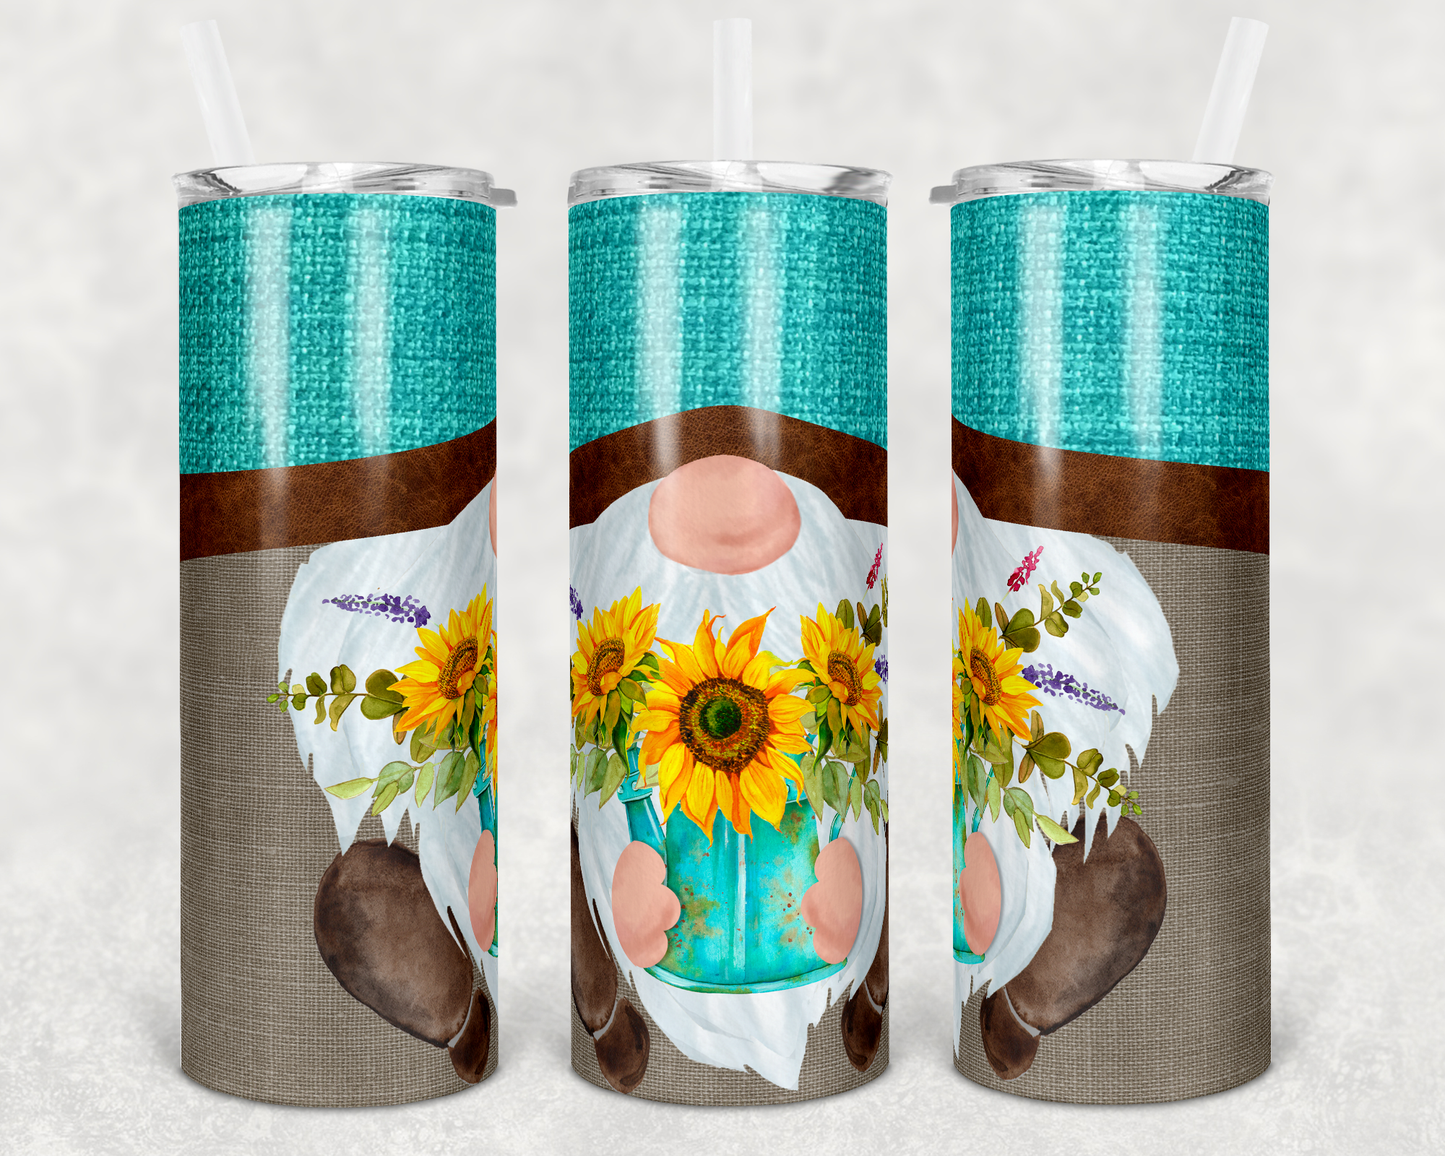 The "Gnome" 20 oz Double Wall Stainless Steel Tumbler